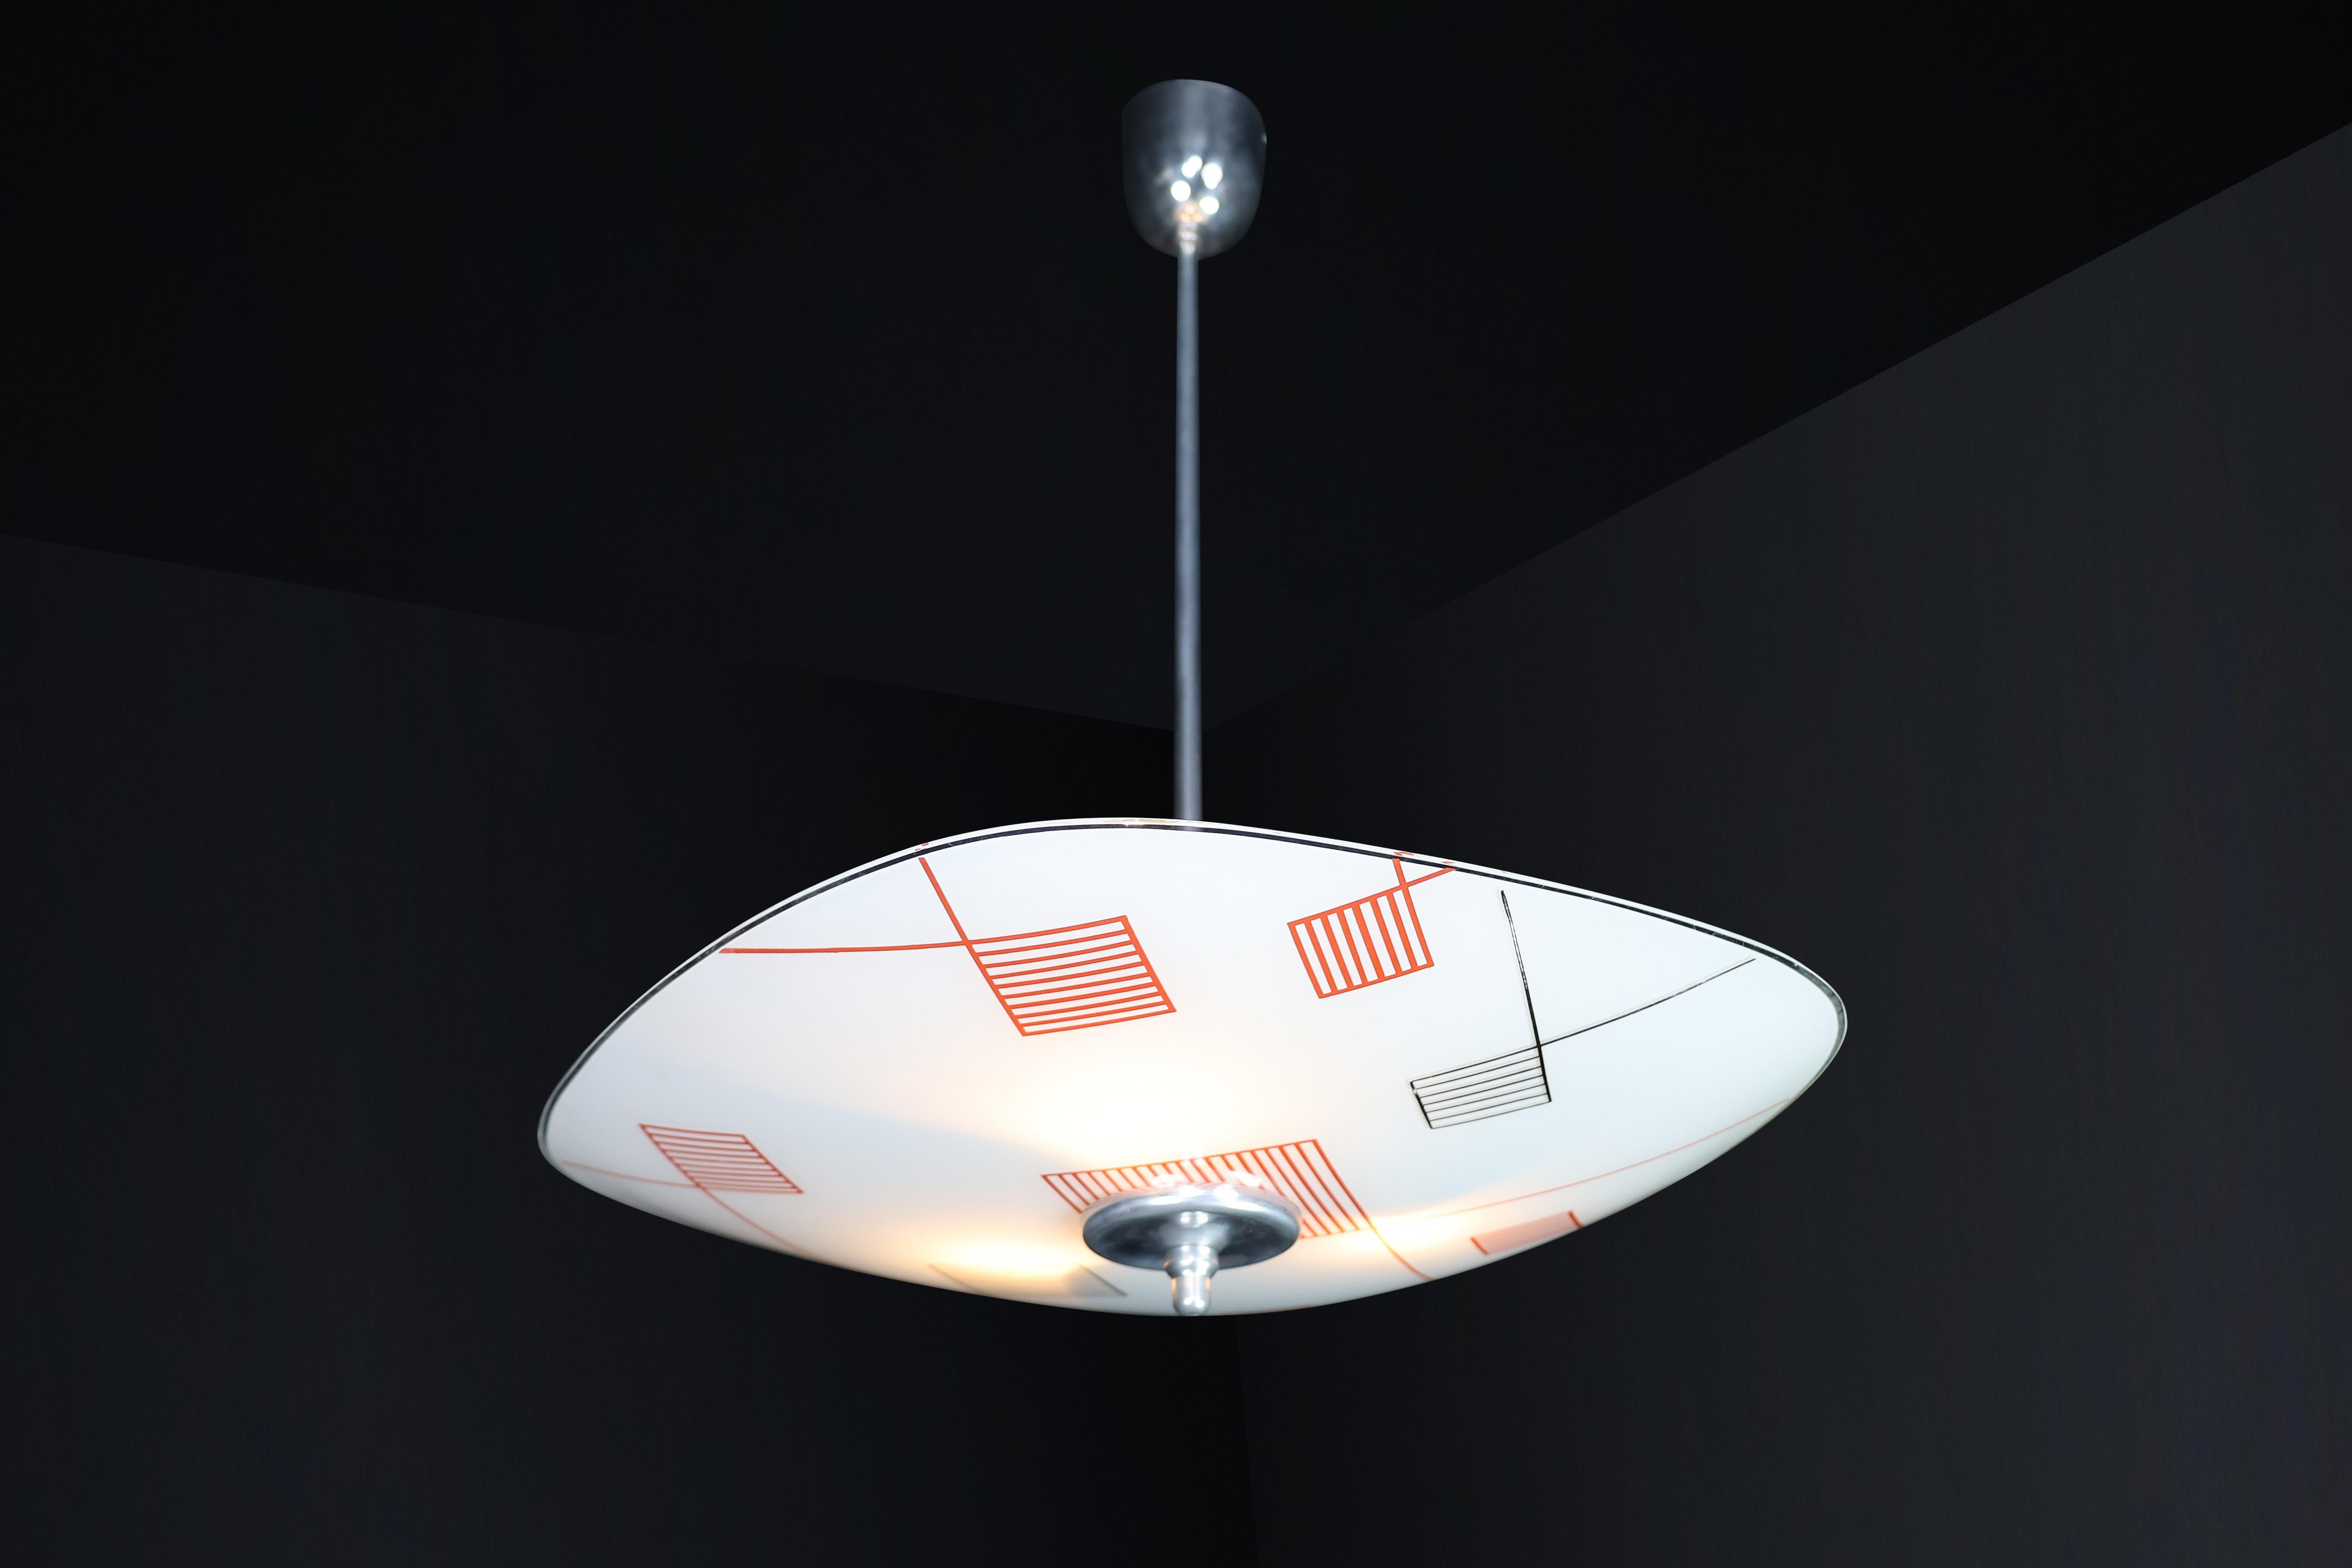 Czech Mid-Century Glass Hanging Pendant Lamp Brussels World Expo 1958 (5115) For Sale